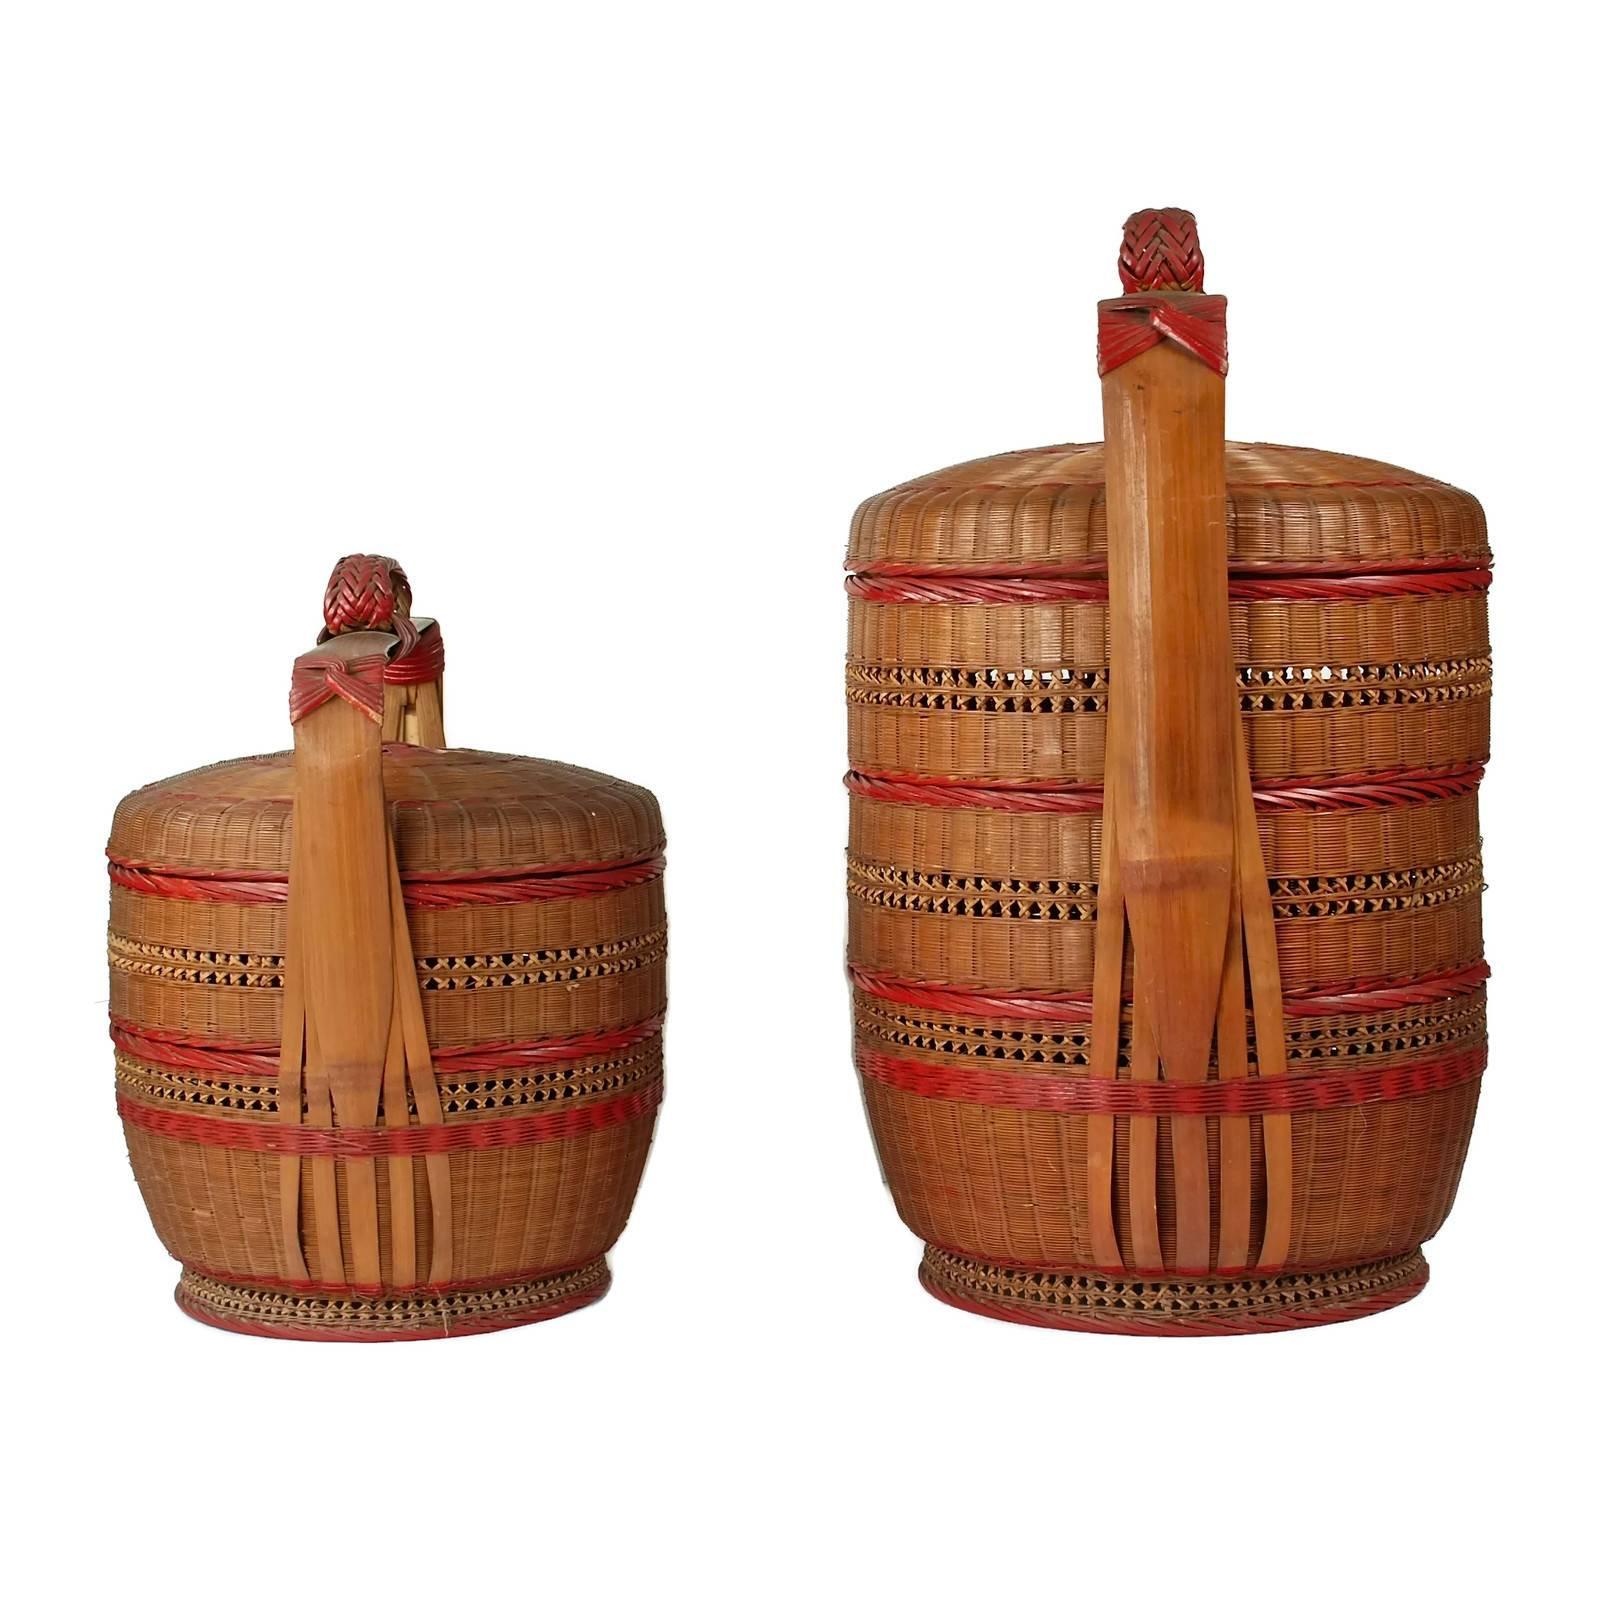 This pair of Japanese wedding baskets date to the early 20th century. The pieces are composed of intricately woven bamboo with the larger having three tiers while the smaller has two. The smaller basket stands 18" tall to the top of the loop